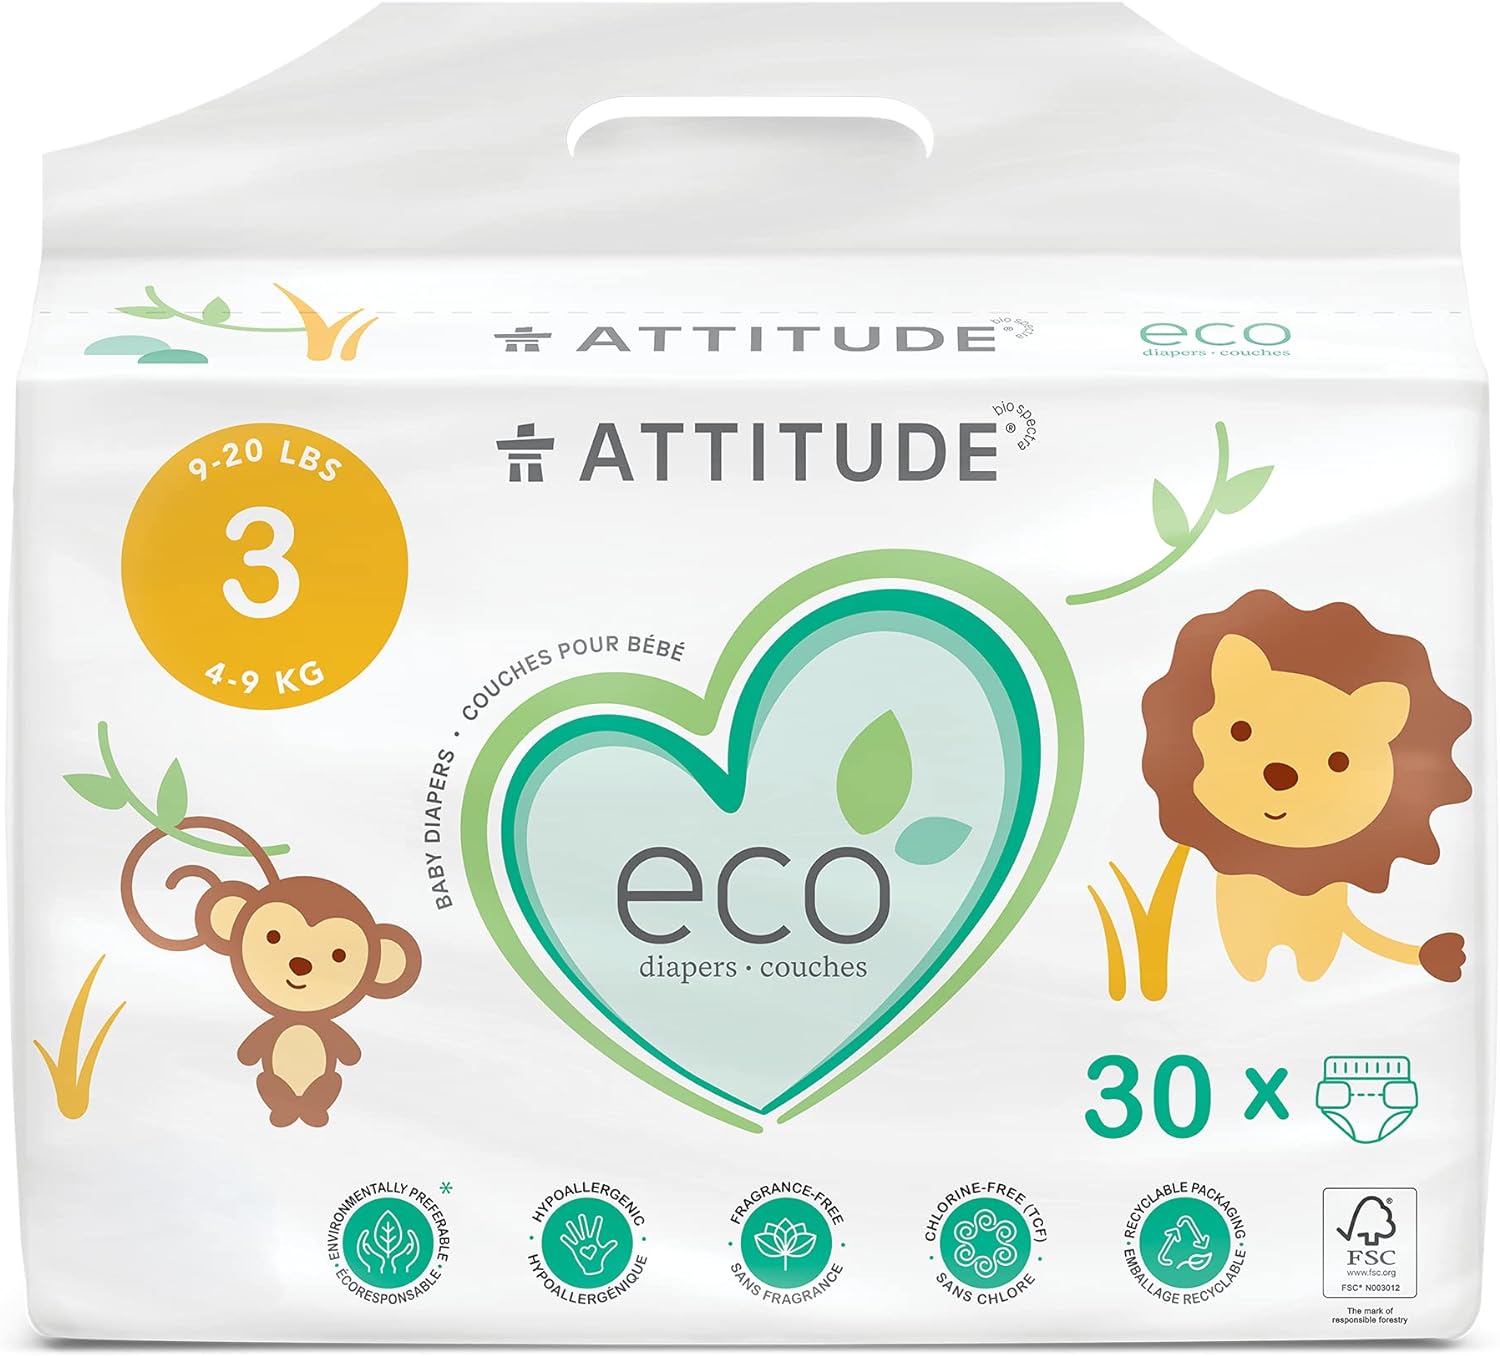 ATTITUDE Natural Diapers, Non-Toxic, Eco-Friendly, Safe for Sensitive Skin, Chlorine-Free, Leak-Free & Biodegradable Baby Diapers, Plain White (Unprinted), Size 3 (9-20 lbs), 30 Count (16230)